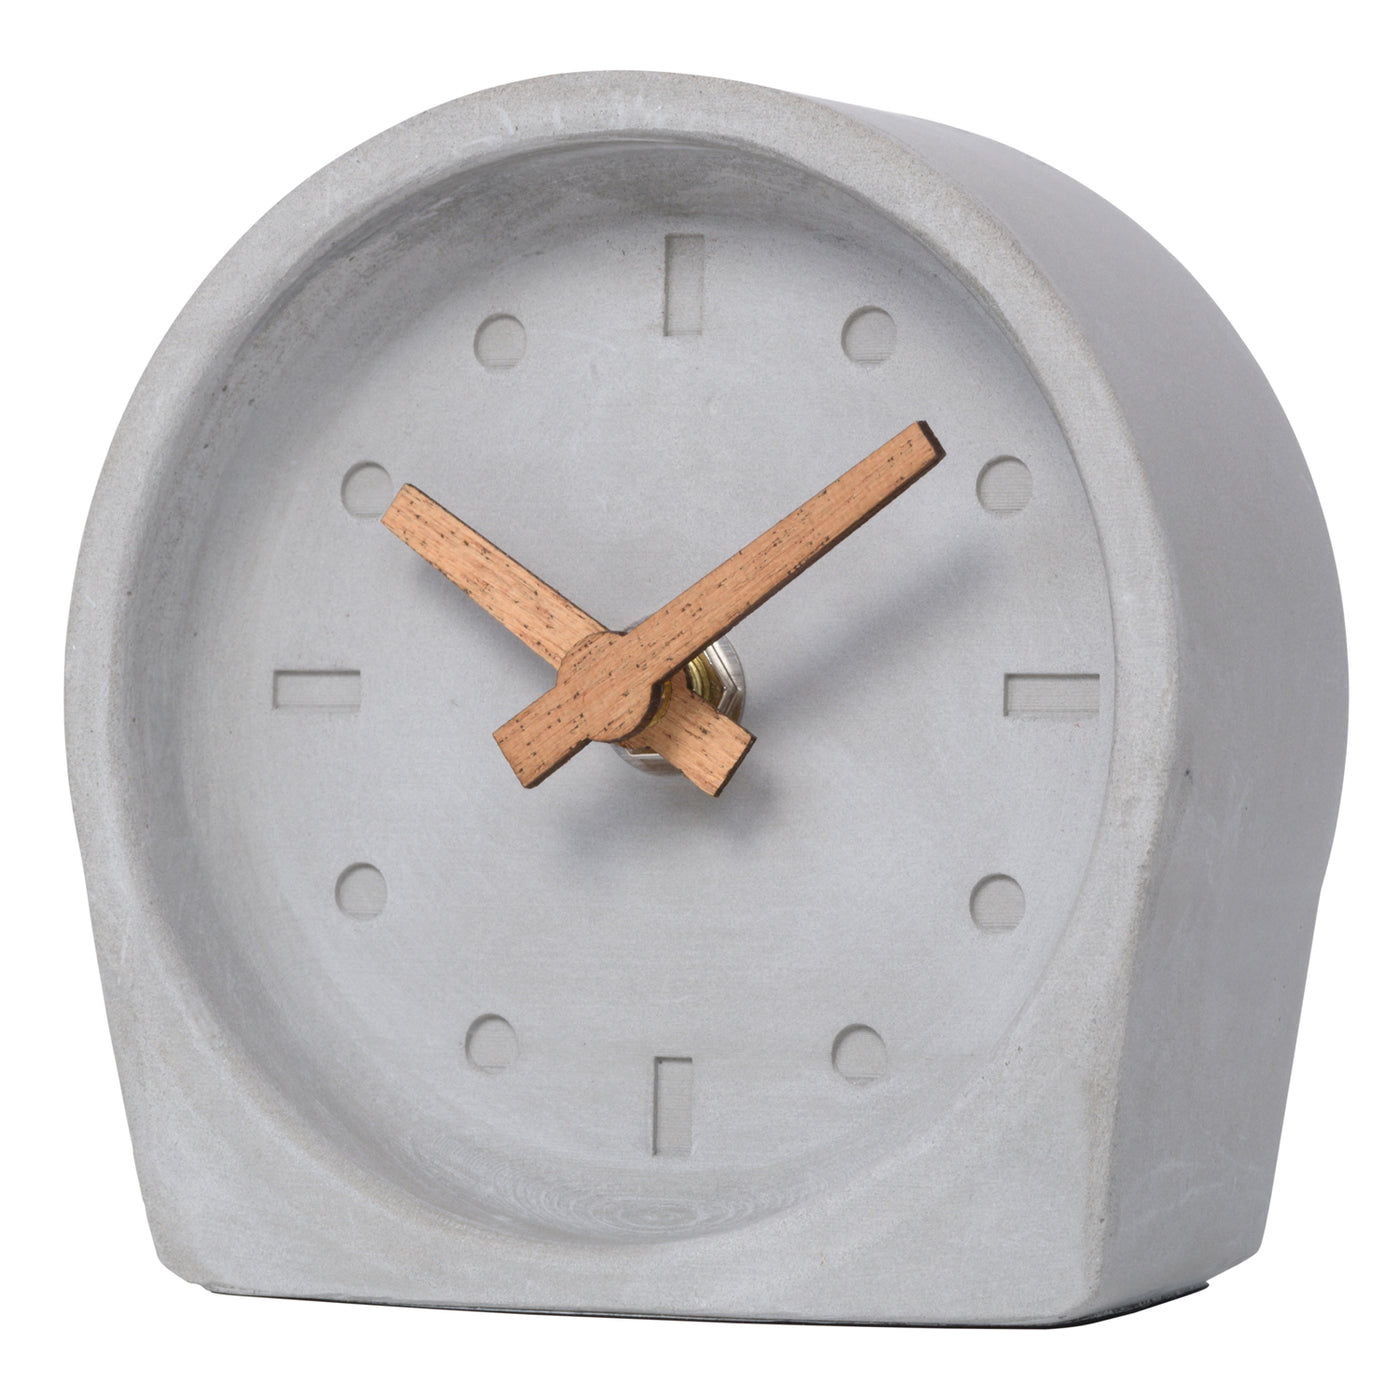 W72531 Cement Analog Tabletop Clock